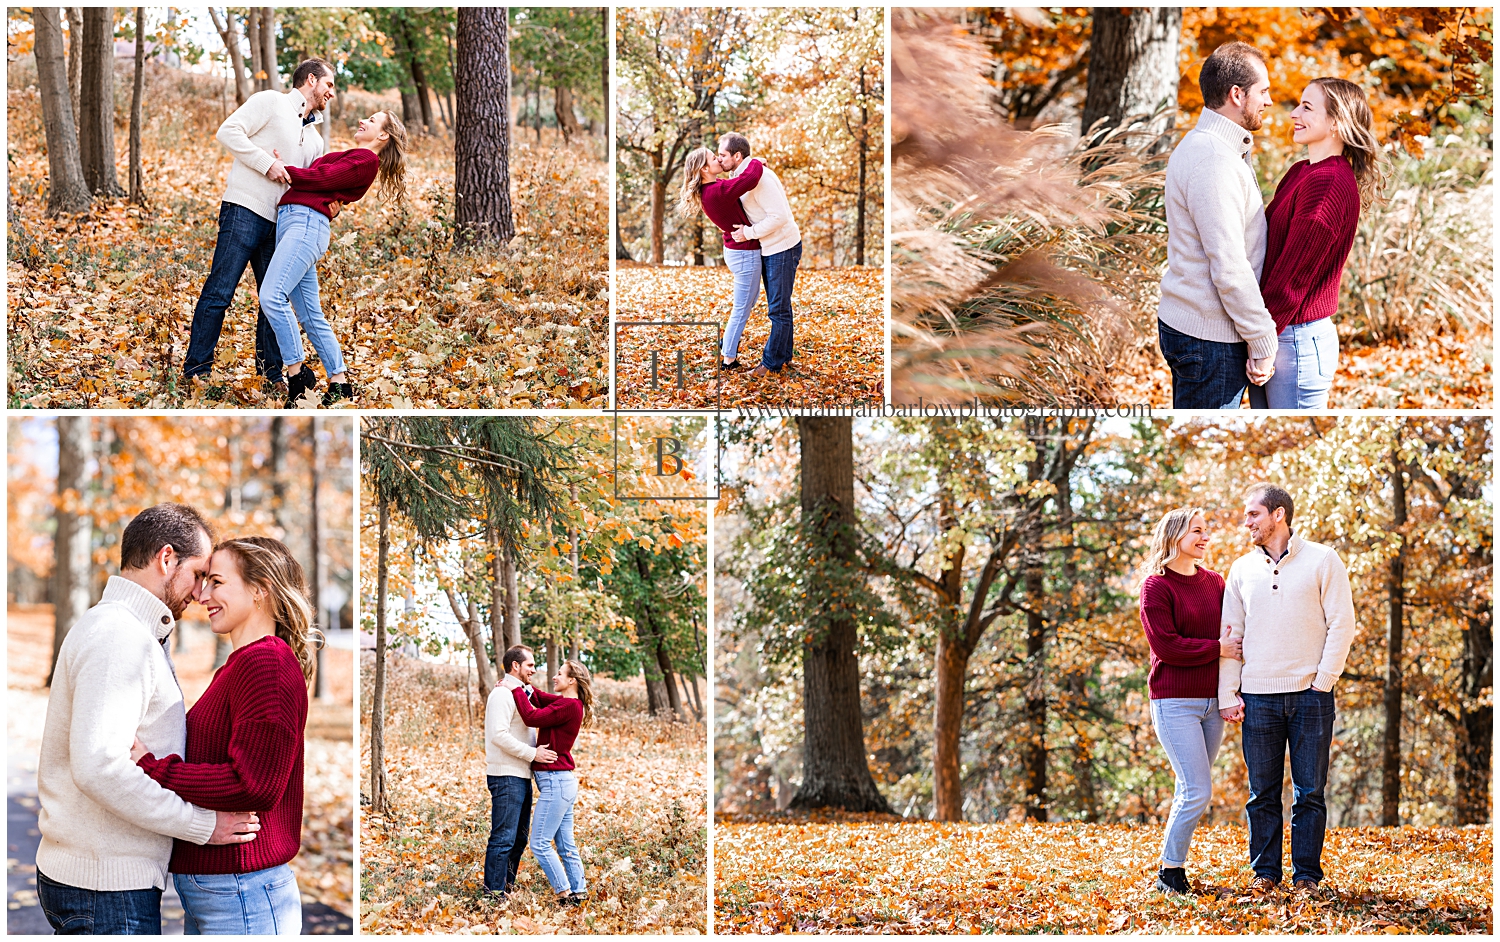 Collage of couple posing for engagement photos in fall foliage and orange leaved trees